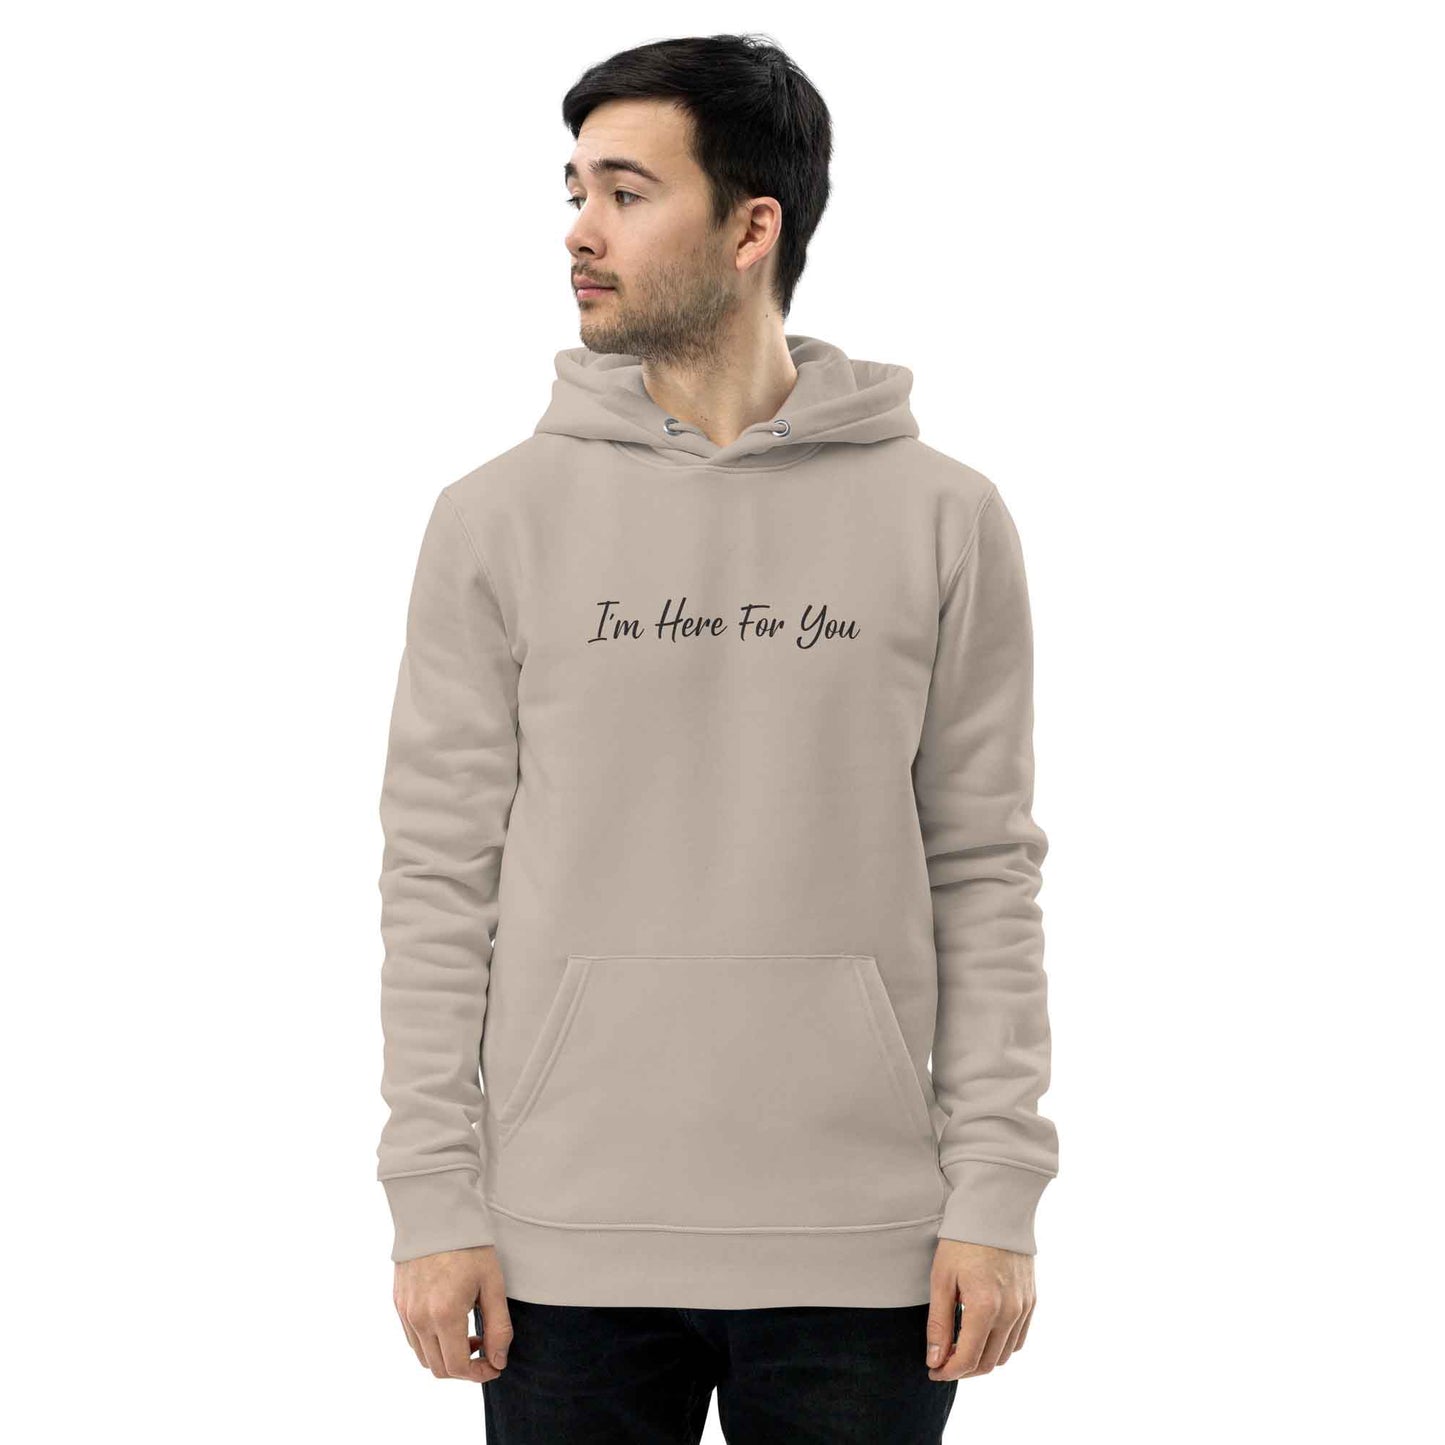 Men beige motivational hoodie with inspirational quote, "I'm Here For You."